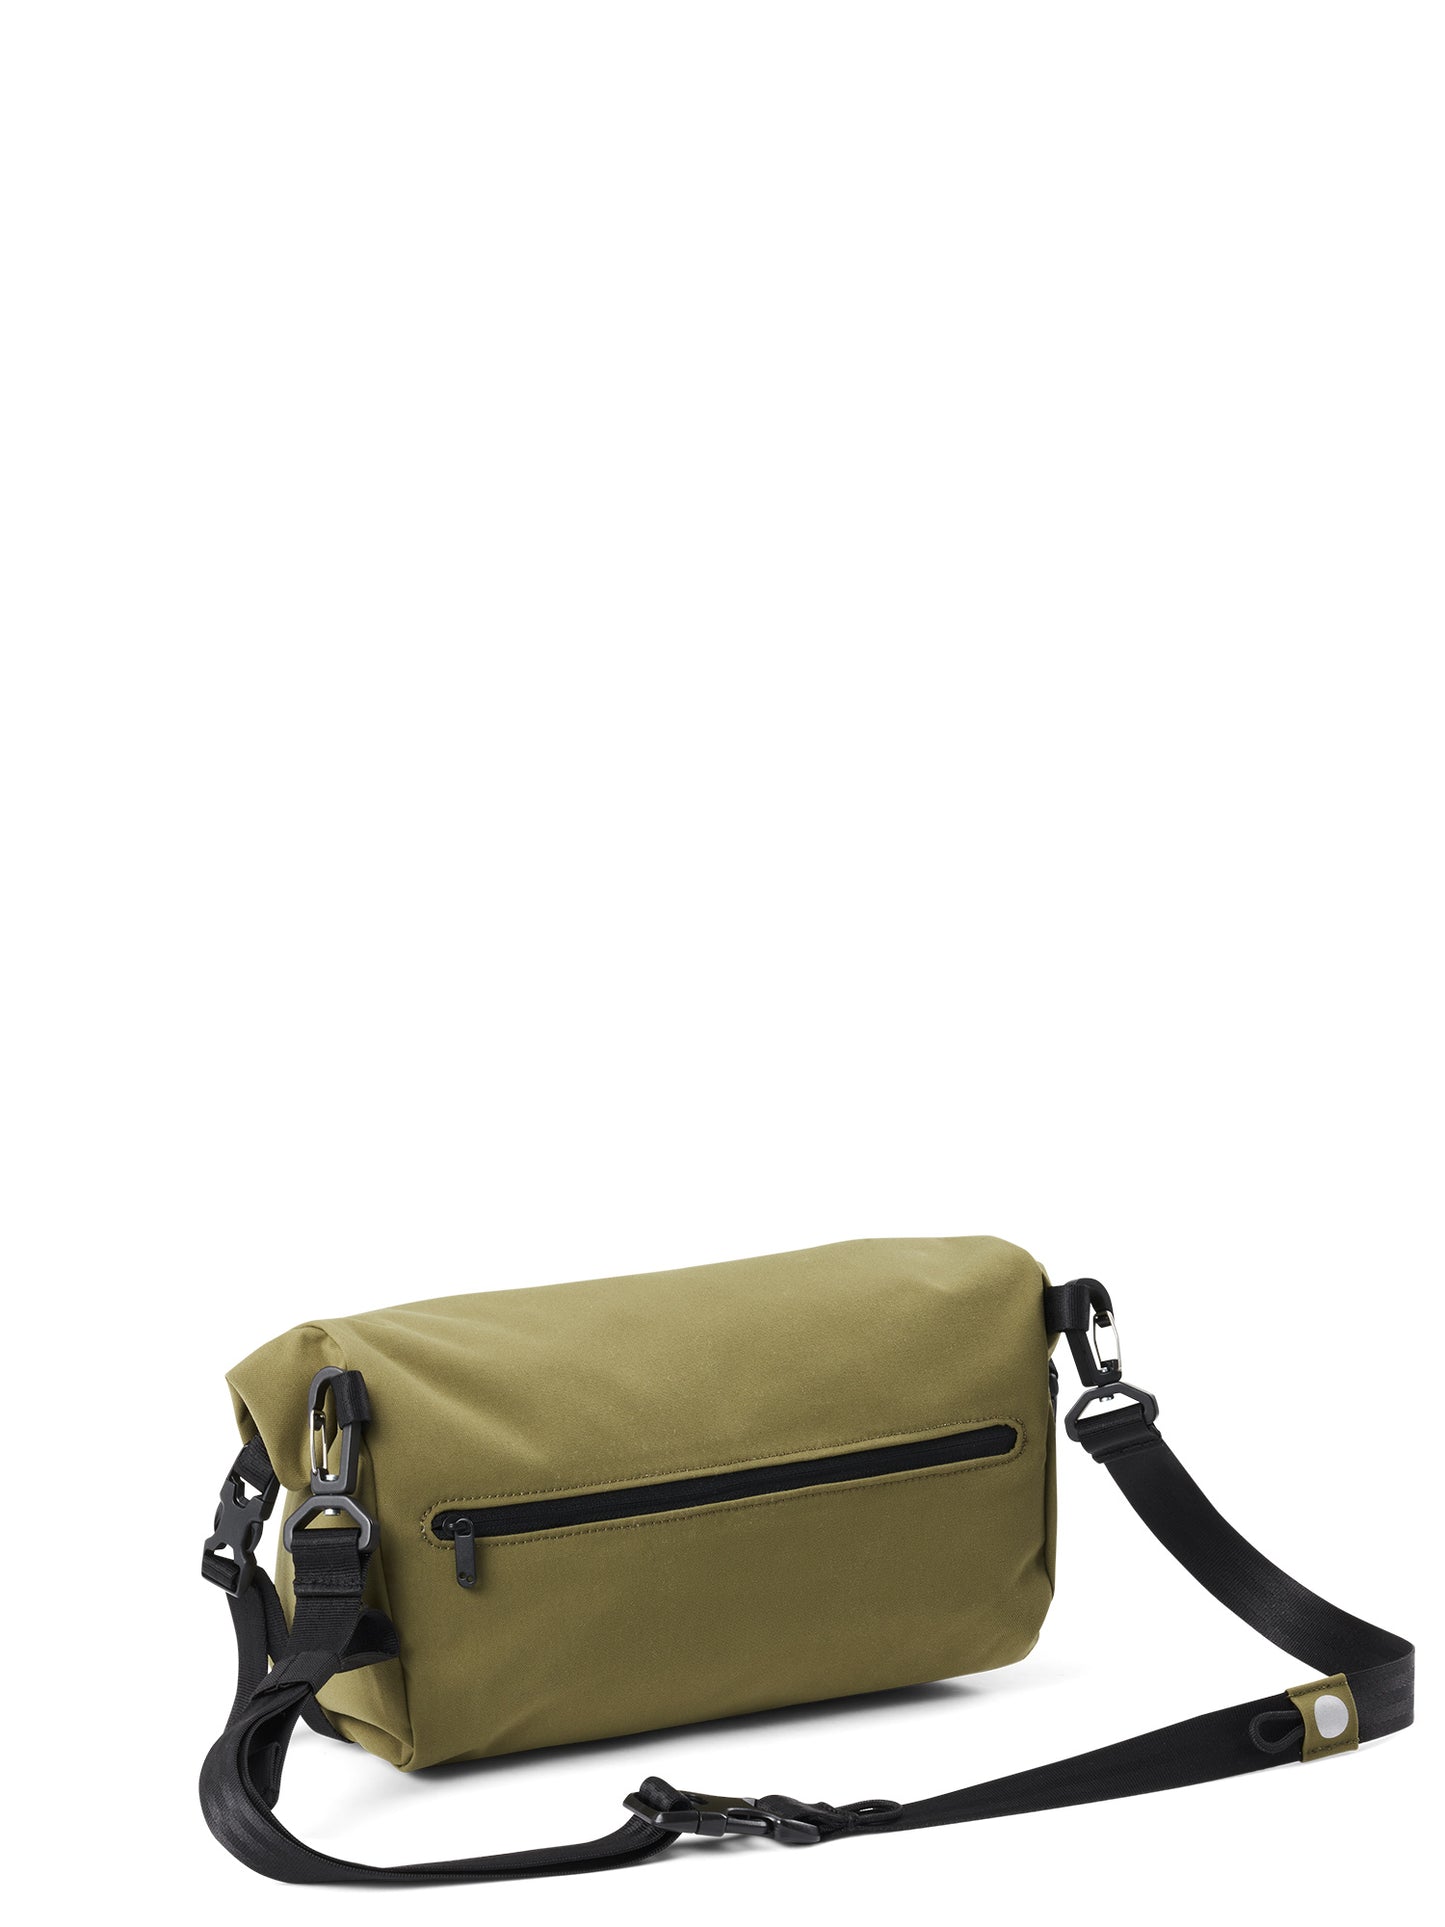 pinqponq-Aksel-Solid-Olive-back